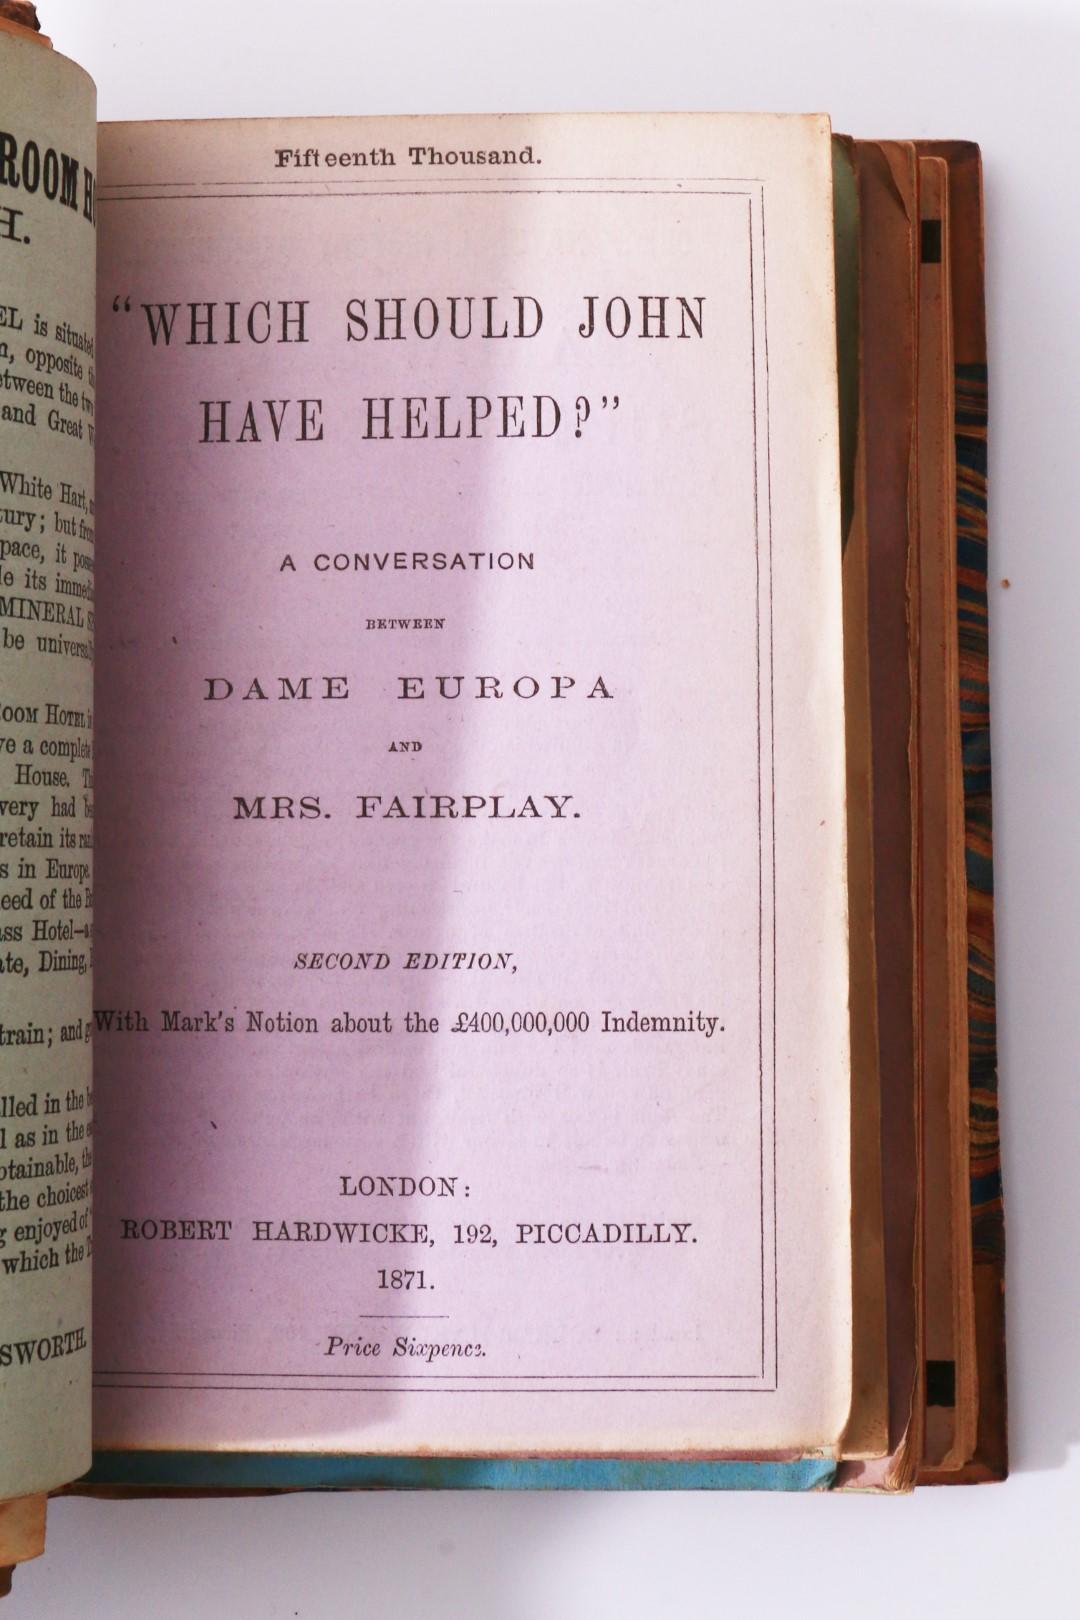 William Henry Pullen - A Bound Collection of Dame Europa Booklets - Simpkin Marshall & Co., n.d. [c1870], First Edition.